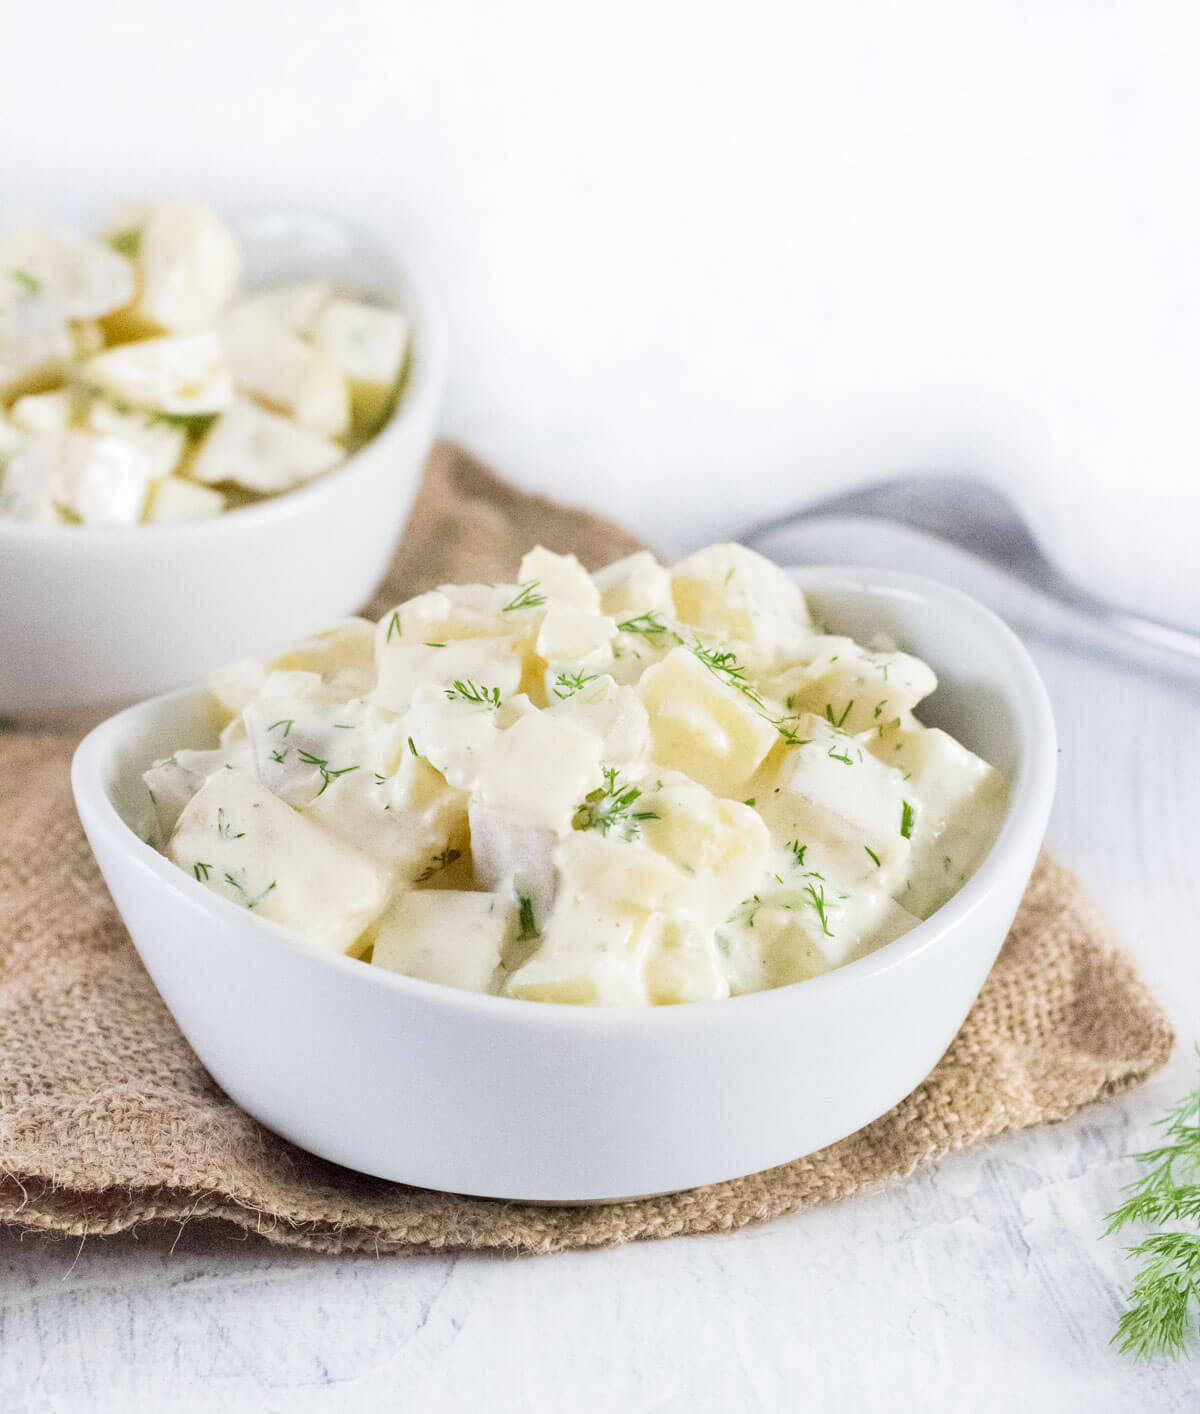 Serving potato salad with dill.